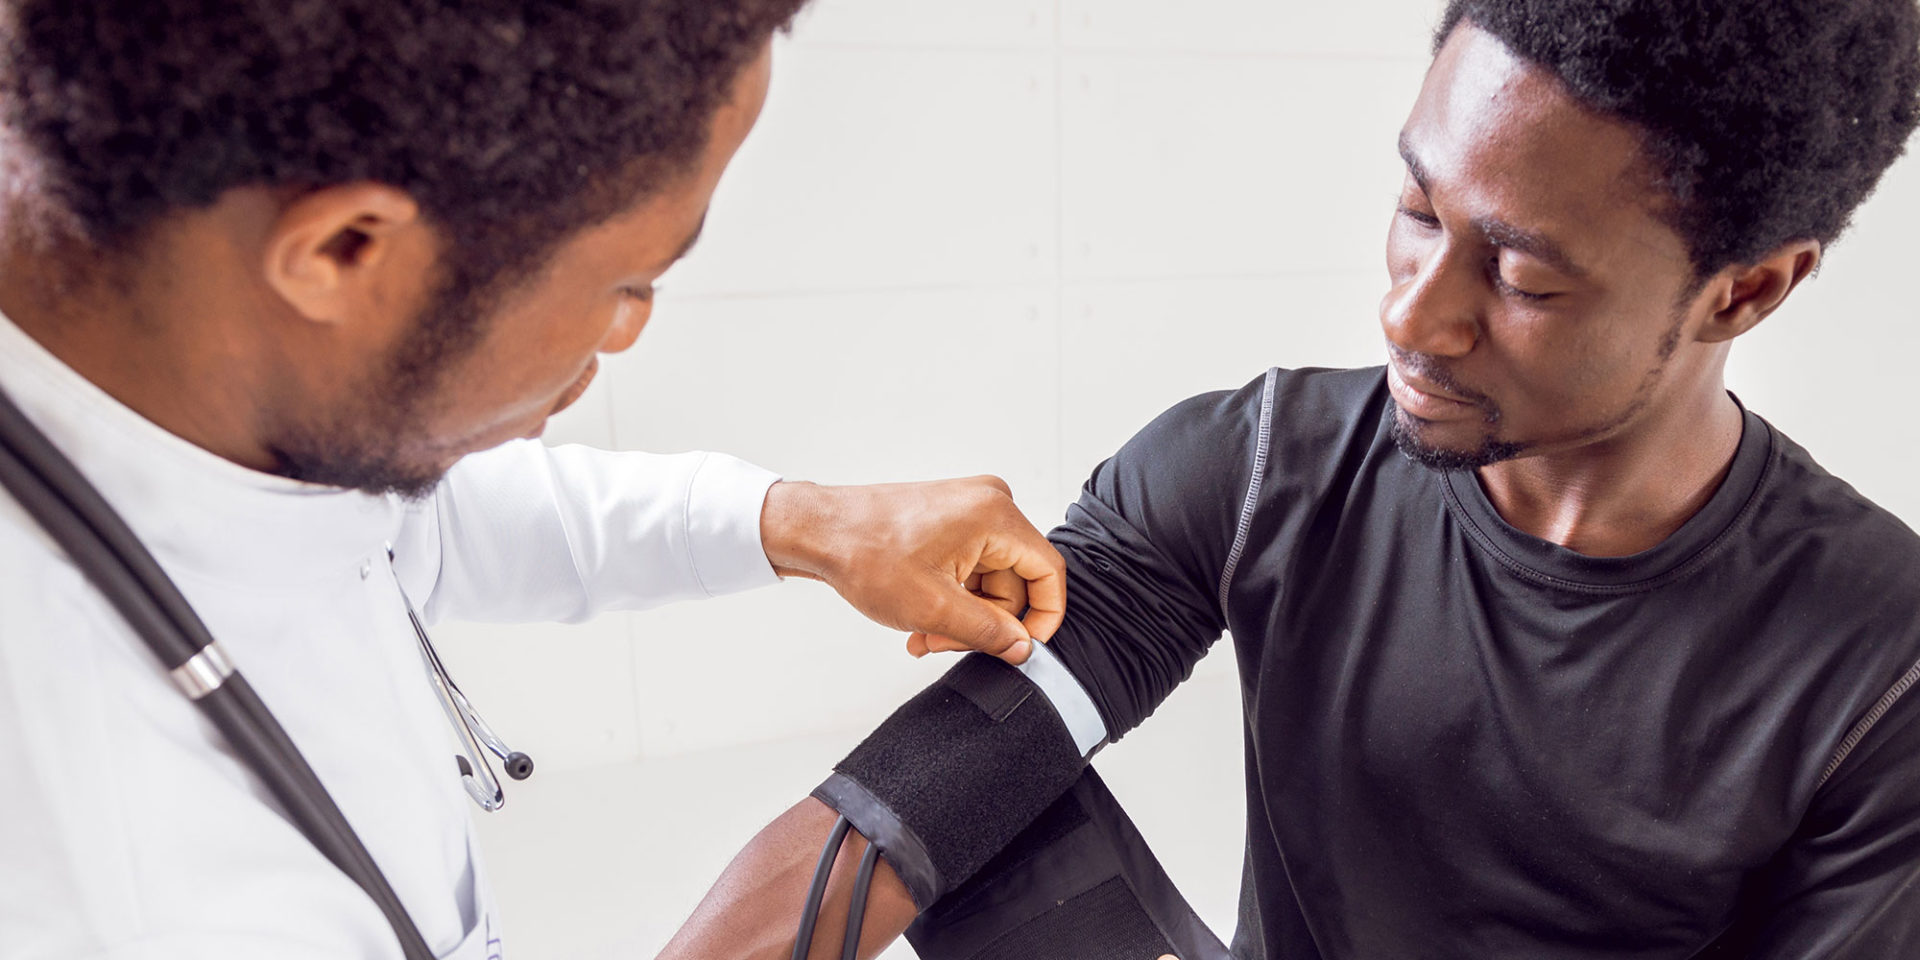 Bias Affects Black People with Chronic Pain